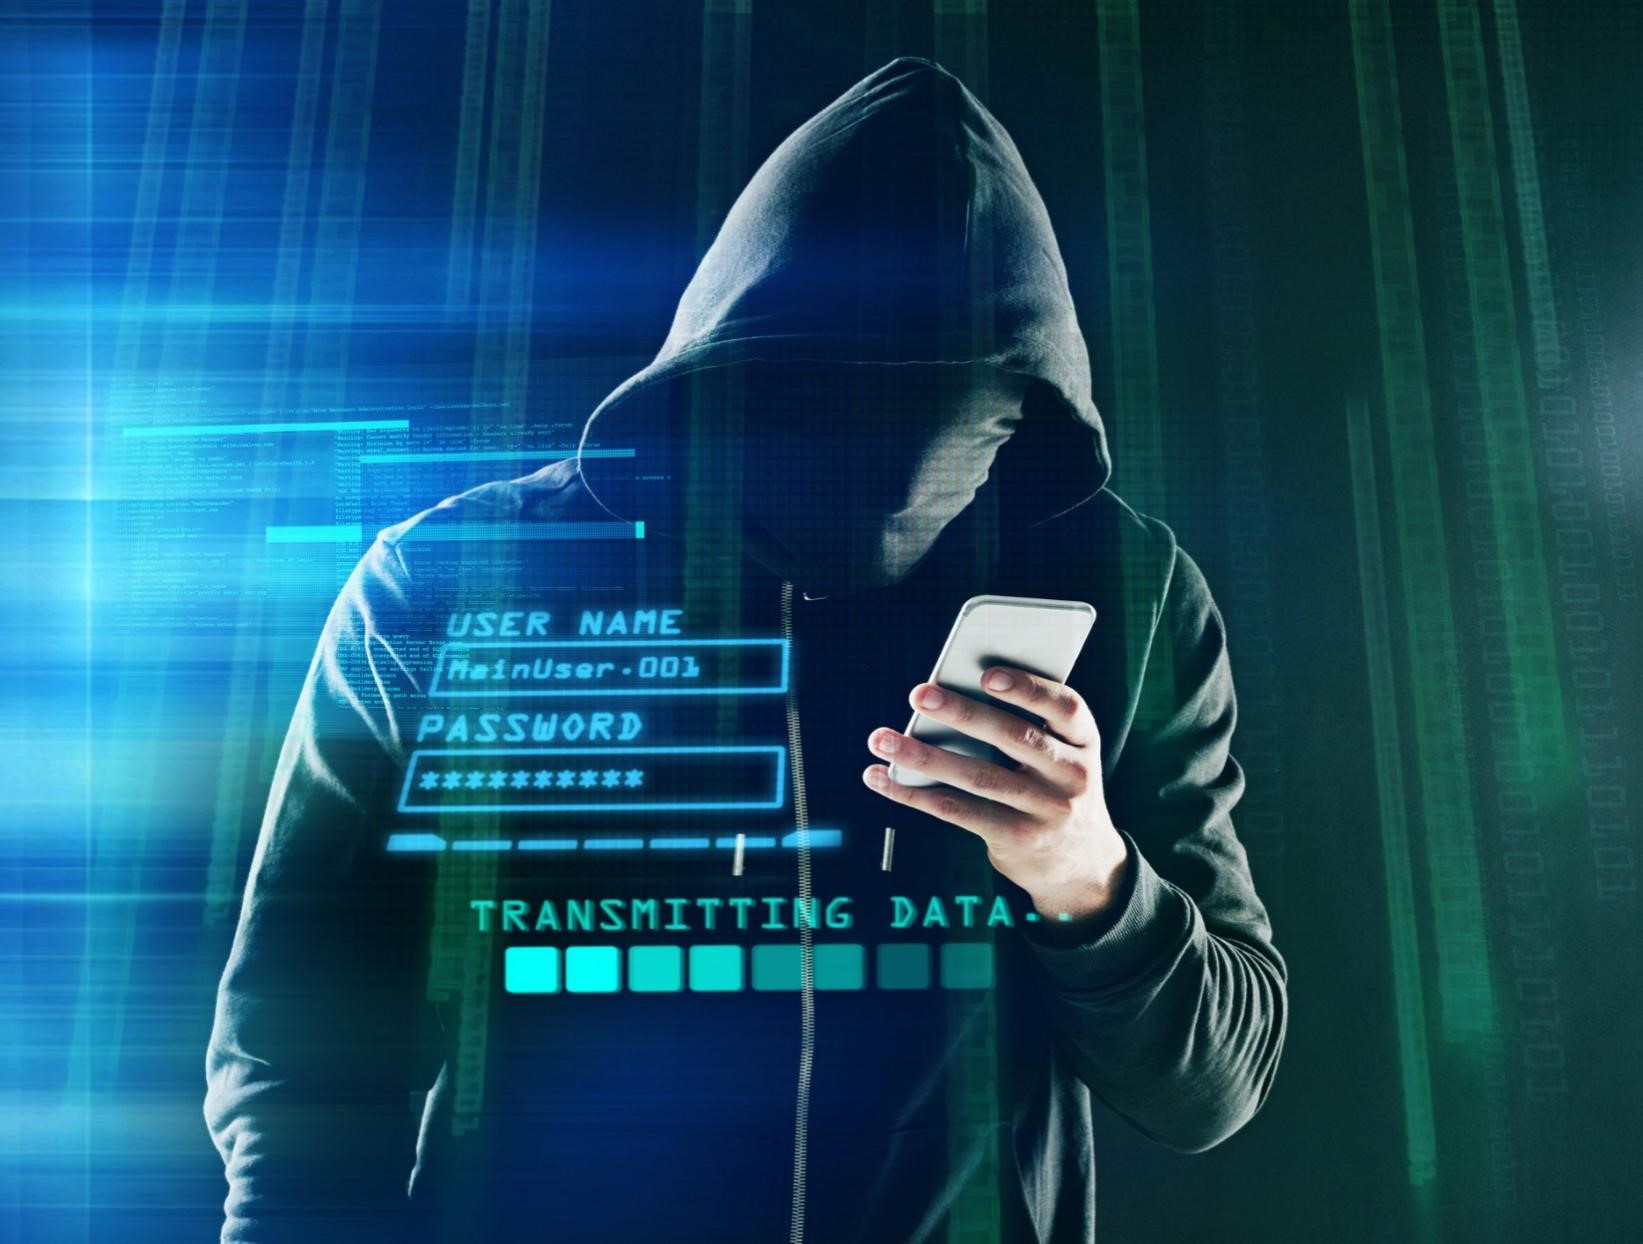 You can hire a hacker for your cell phone – NETPREDATOR